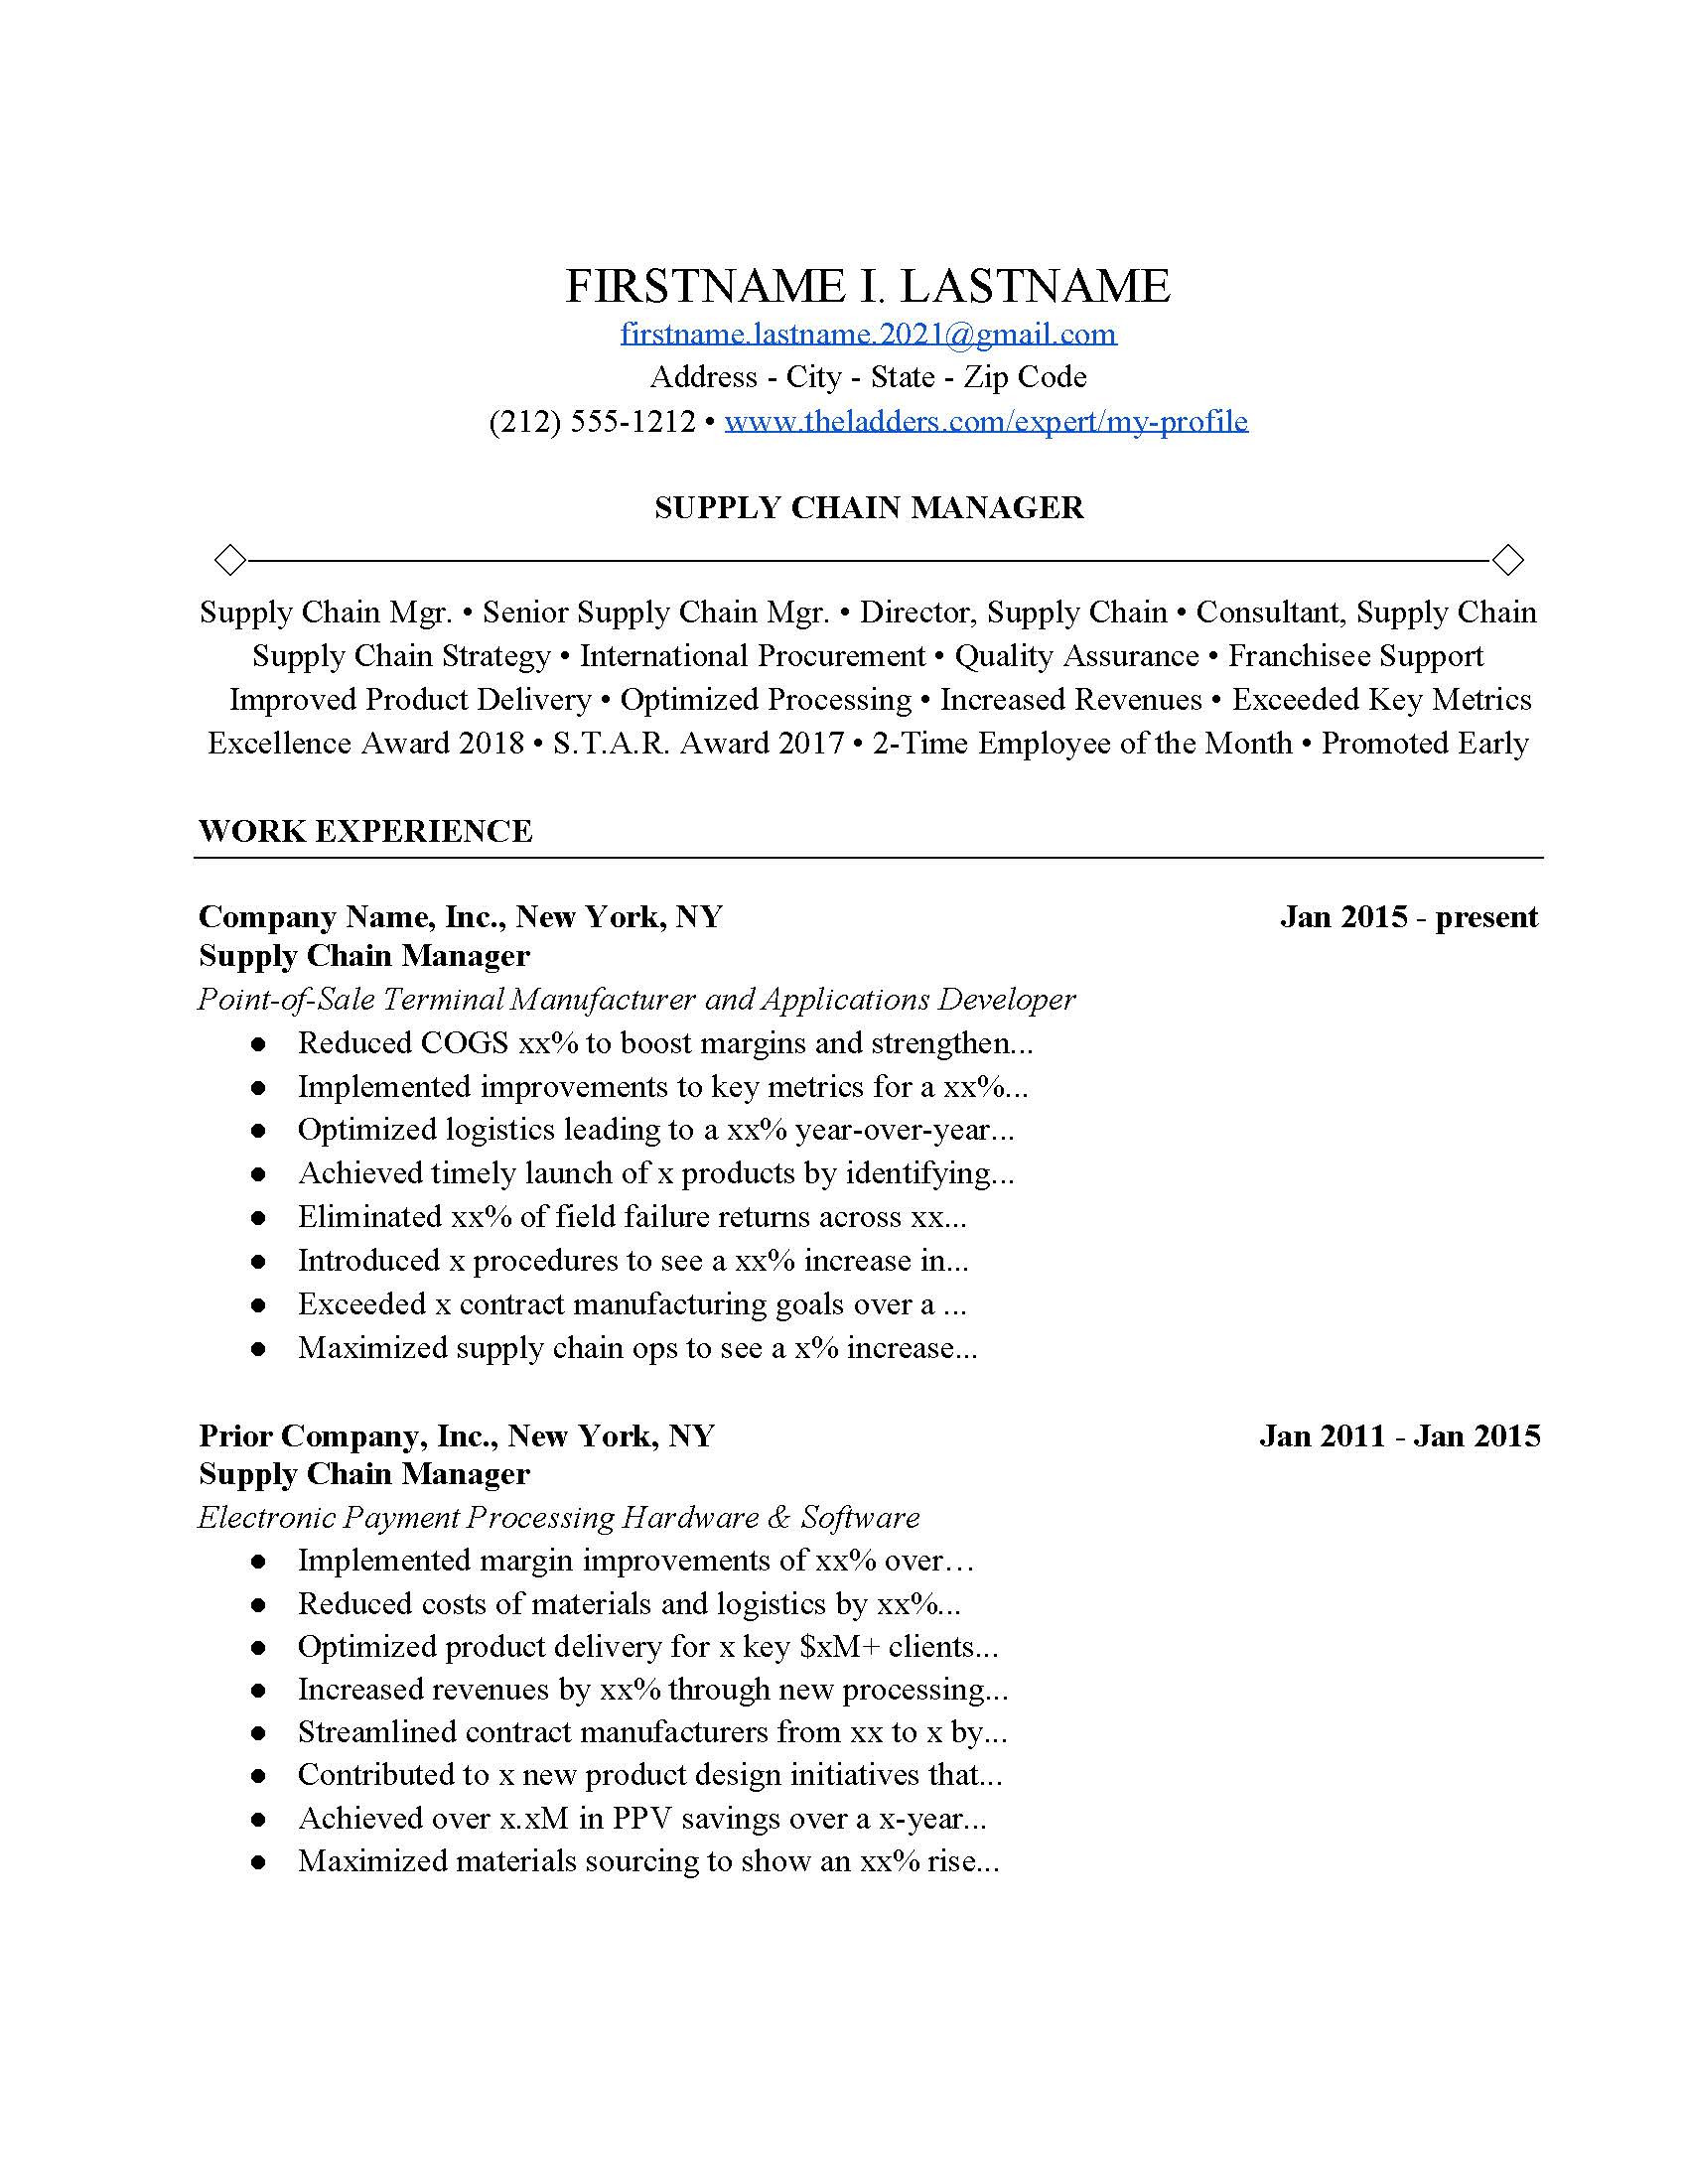 Sample Resume for Logistics and Supply Chain Management Pdf Supply Chain Manager Resume Example